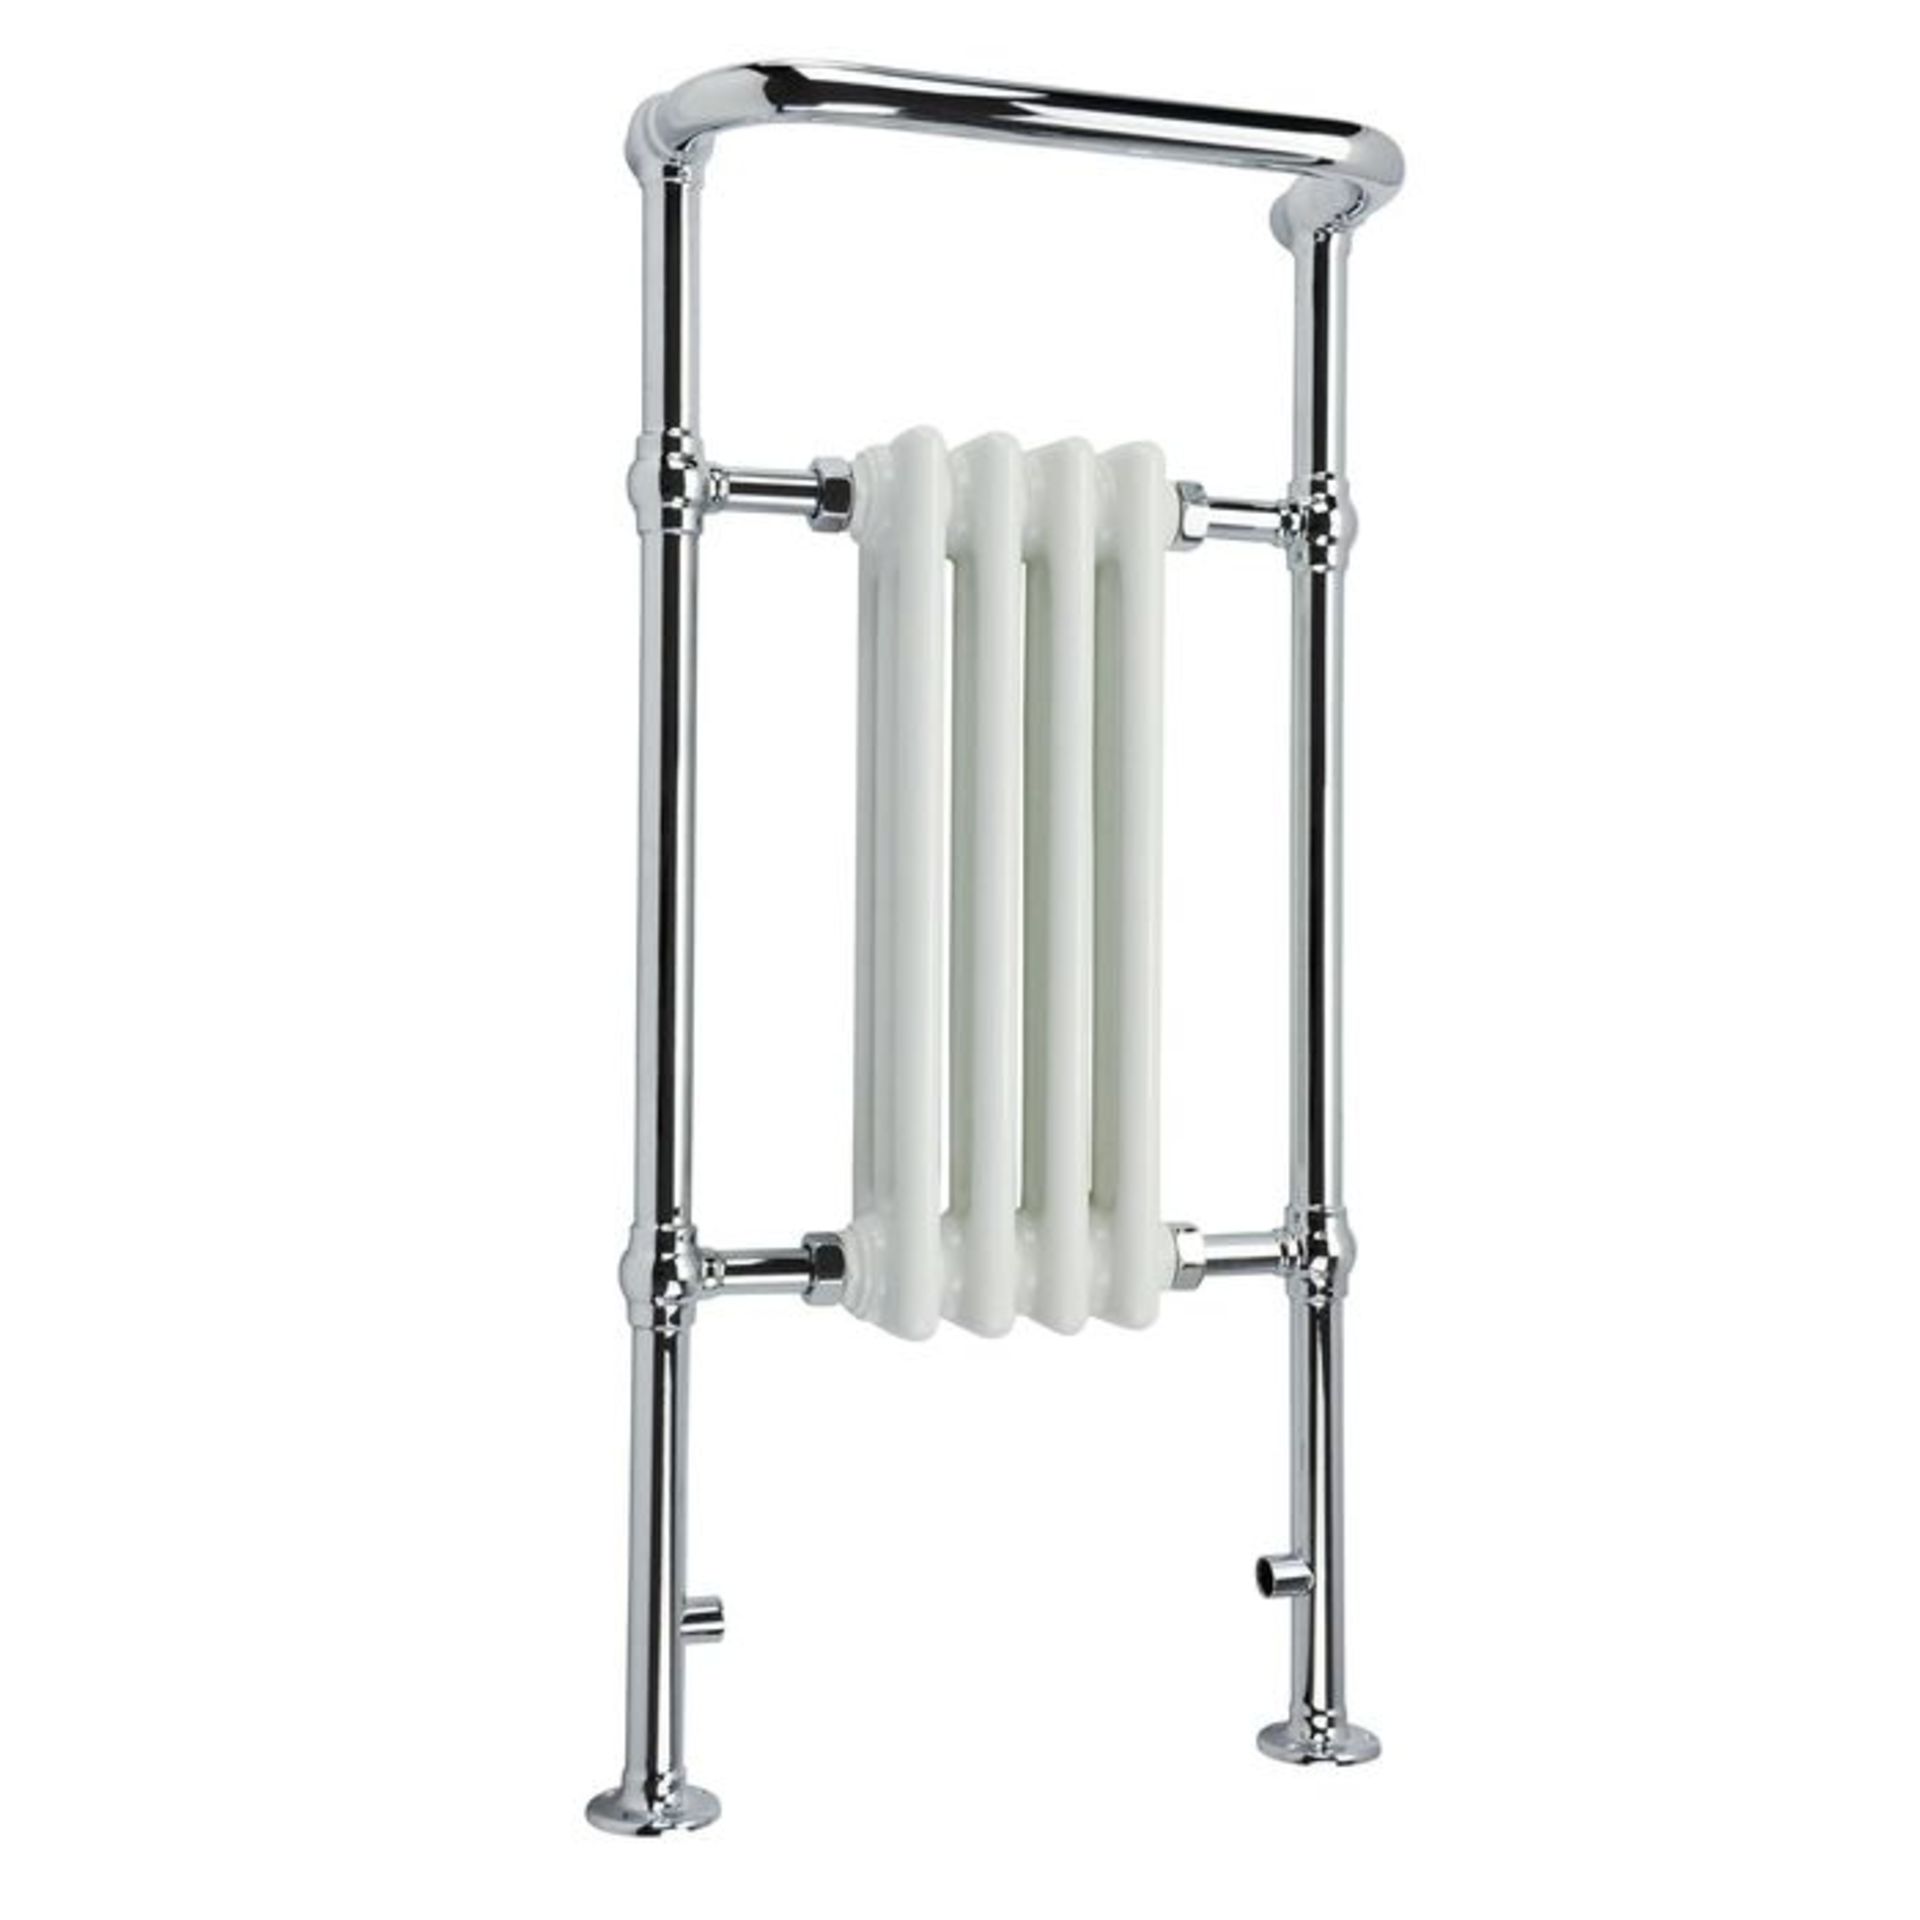 (O34) 952x479mm Small Traditional White Towel Rail Radiator - Cambridge. RRP £287.99. We love this - Image 3 of 4